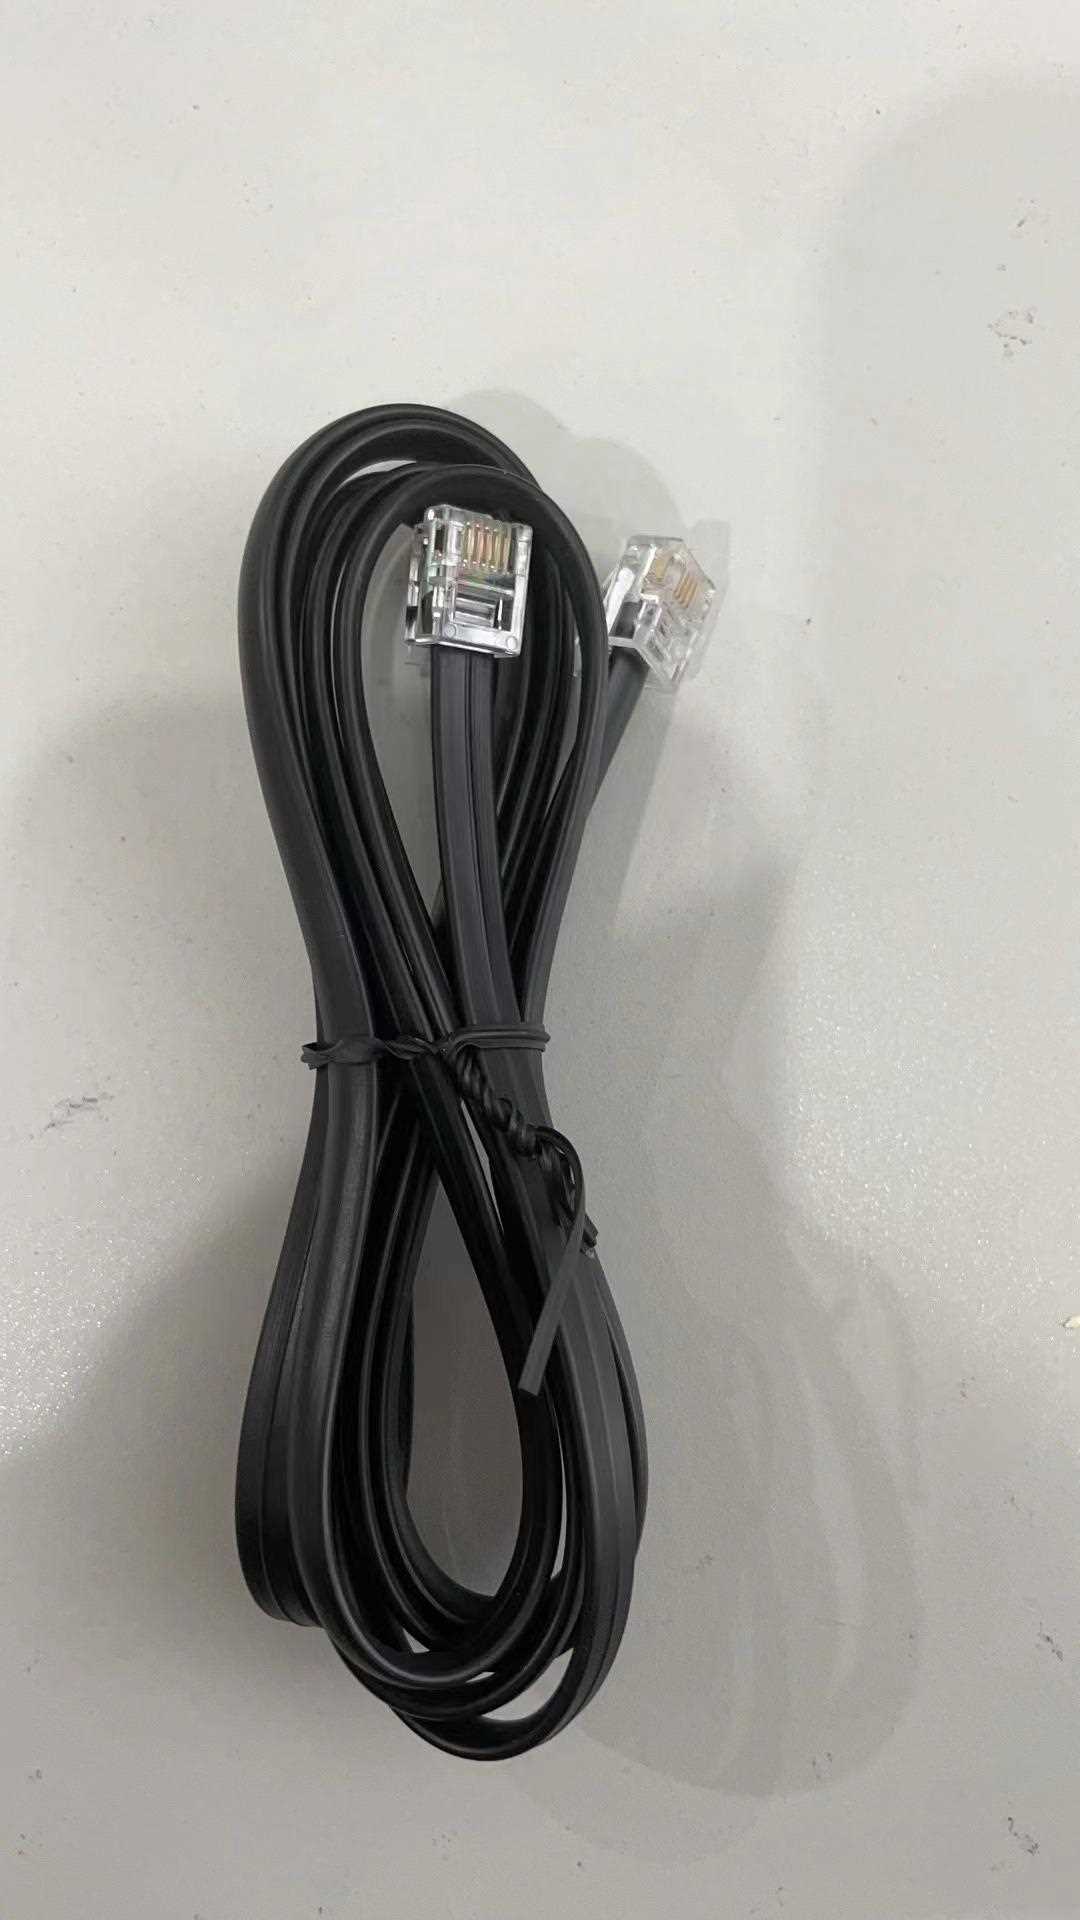 Capture 2 meter RJ11 cable for CA-CF460-6800 